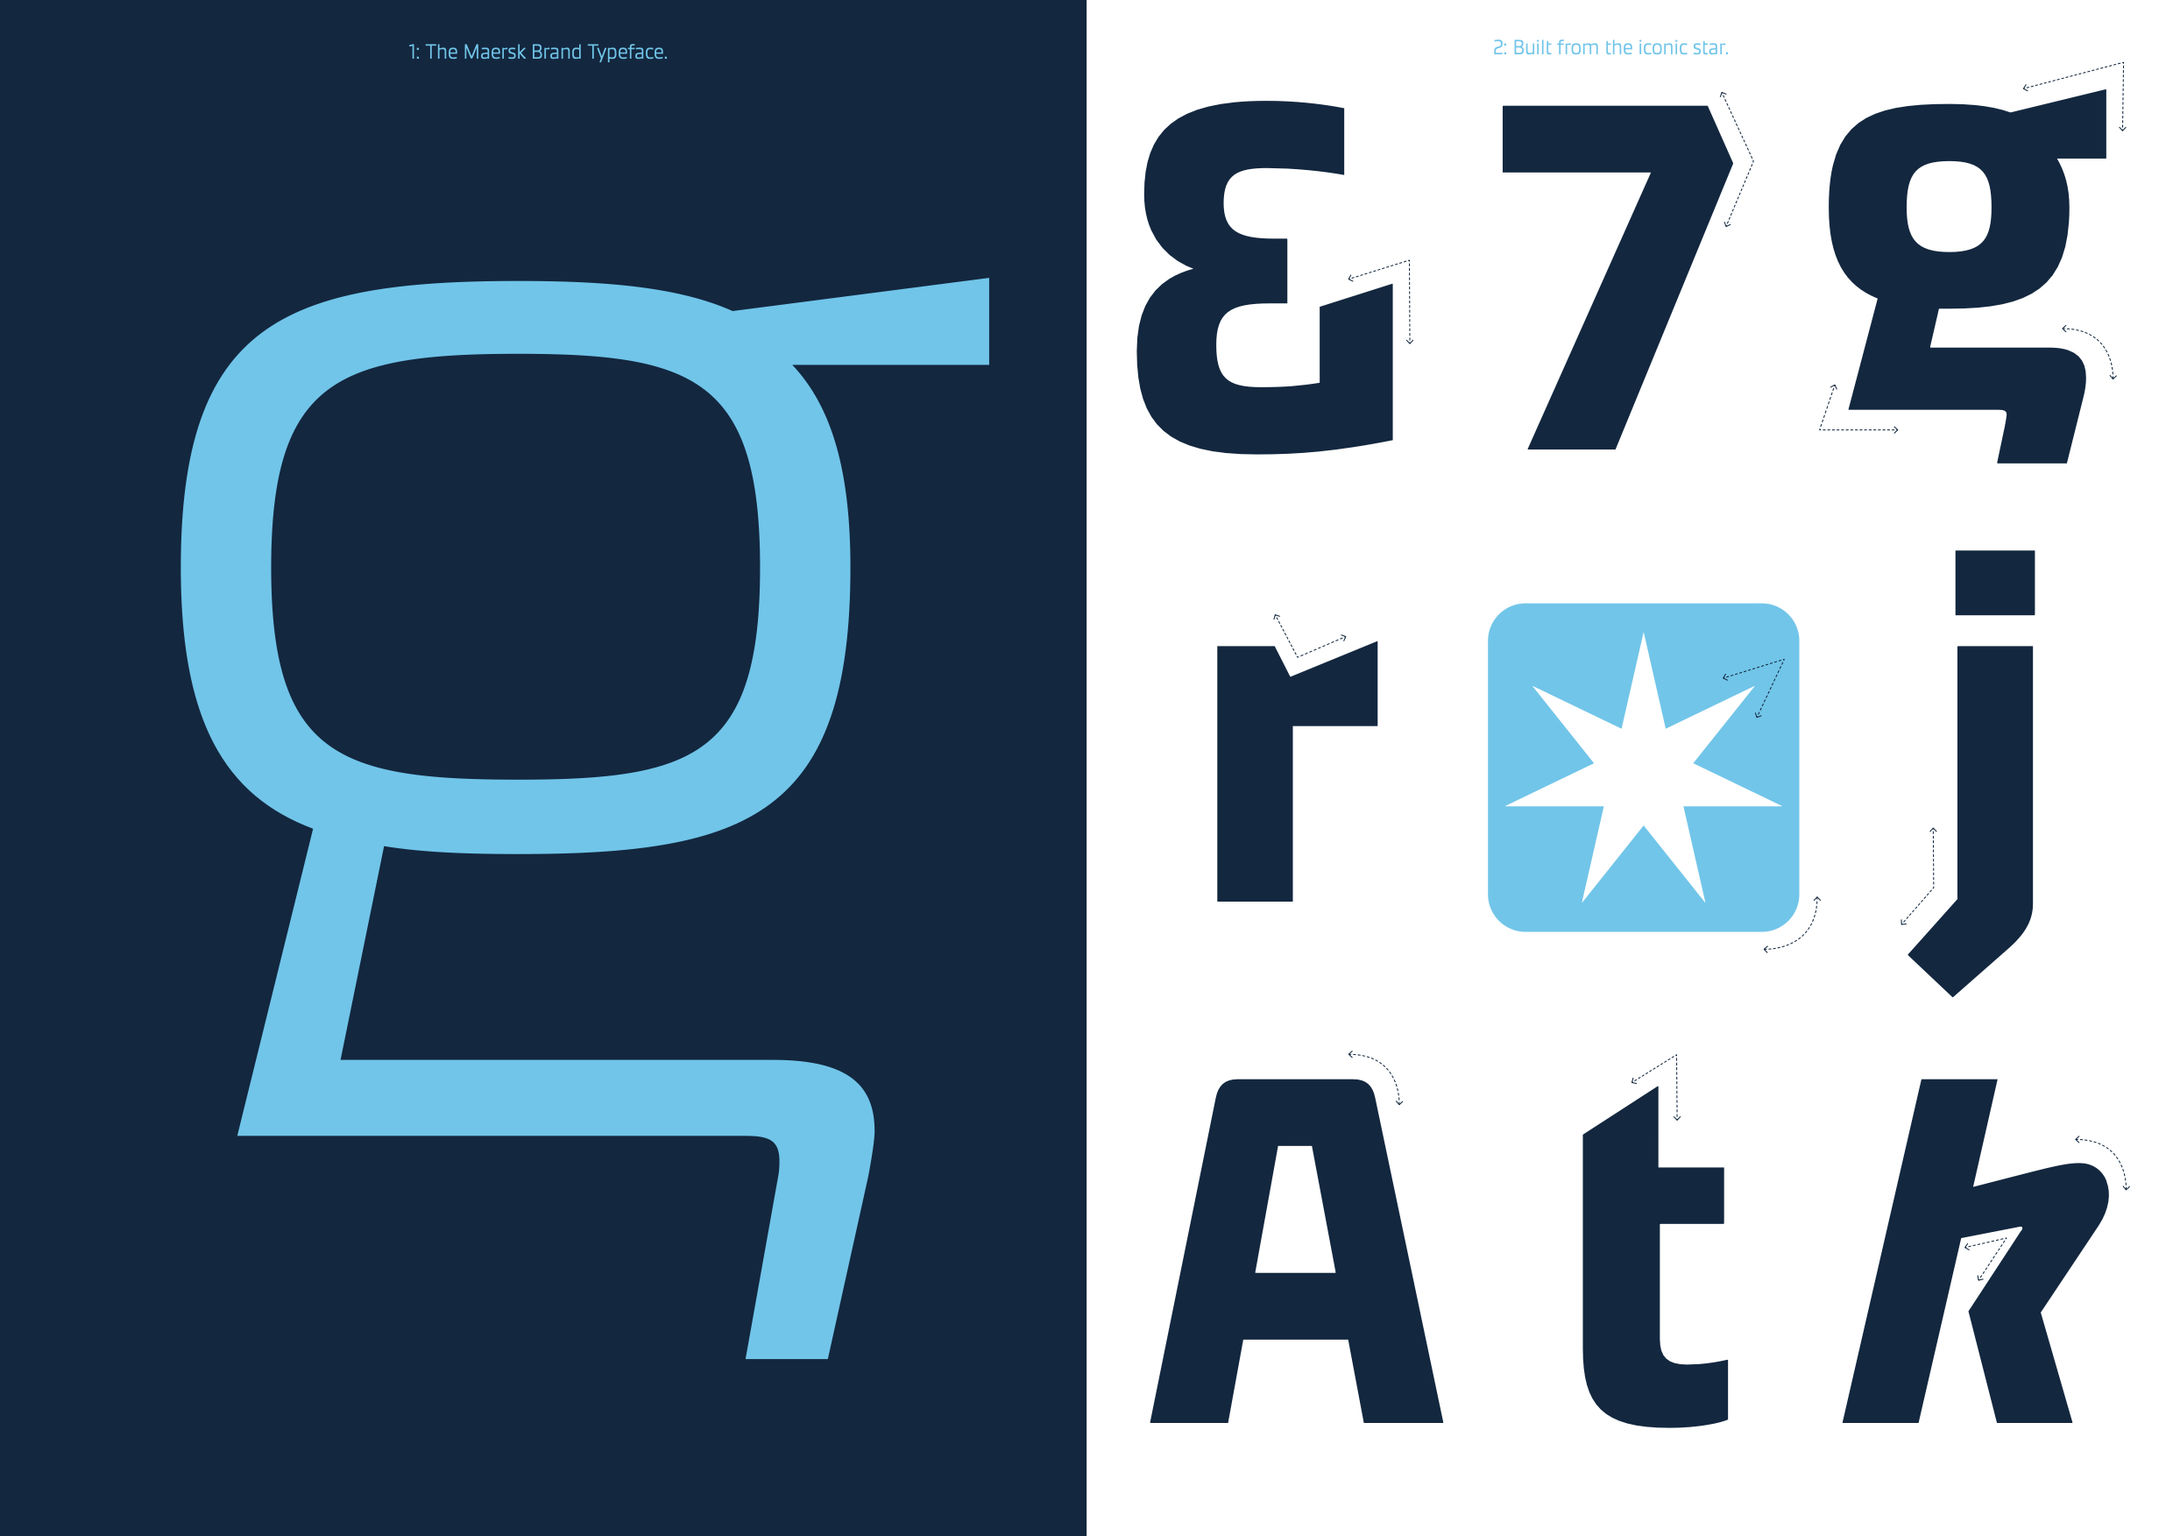 Maersk – A liable typeface family